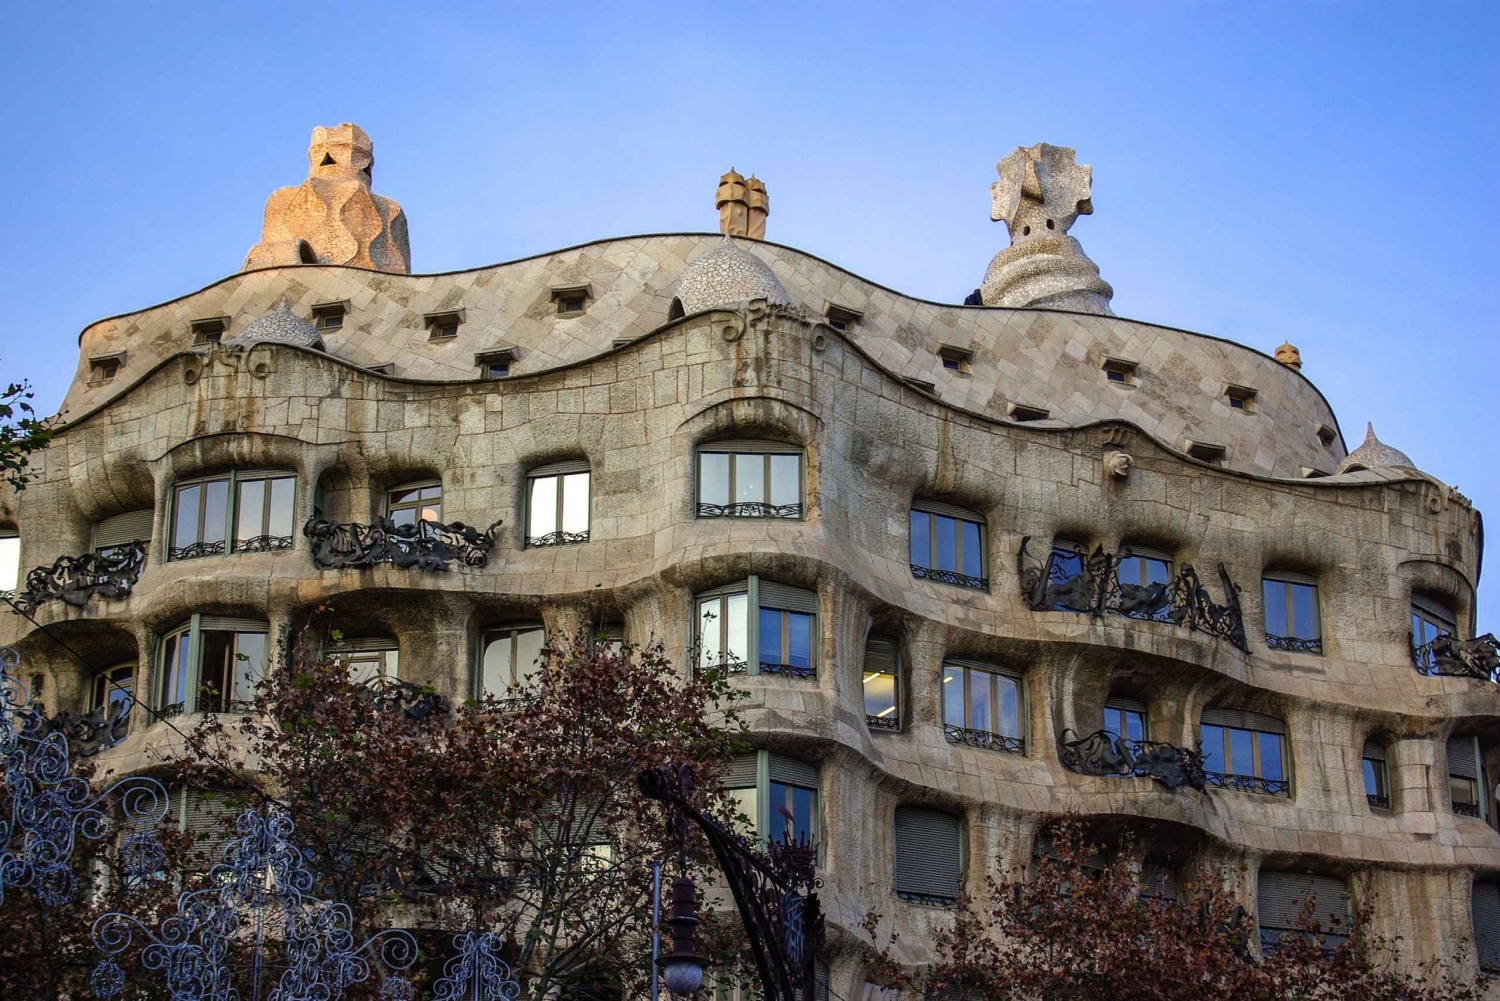 Barcelona: Architecture Walking Tour With Local Guide